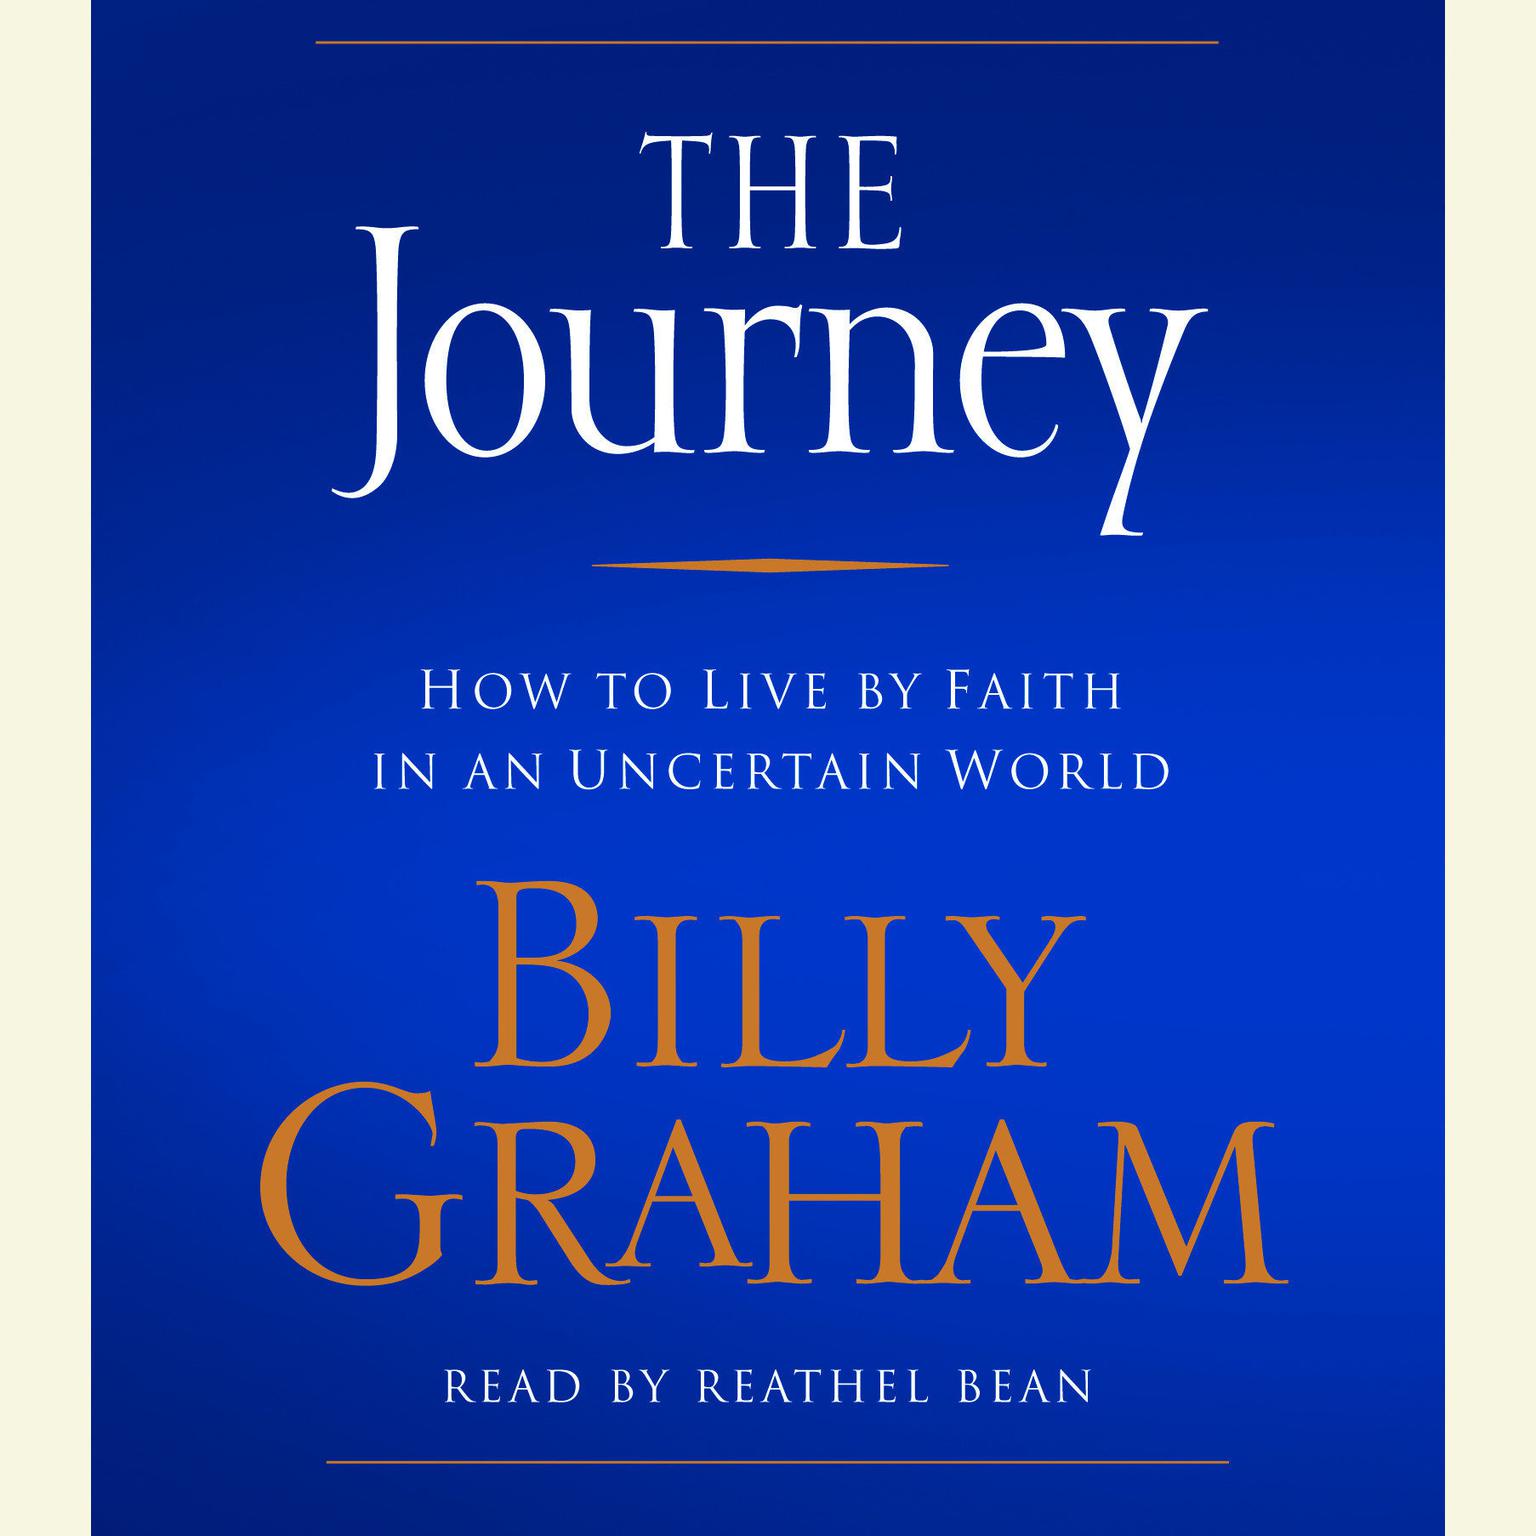 The Journey (Abridged): How to Live by Faith in an Uncertain World Audiobook, by Billy Graham